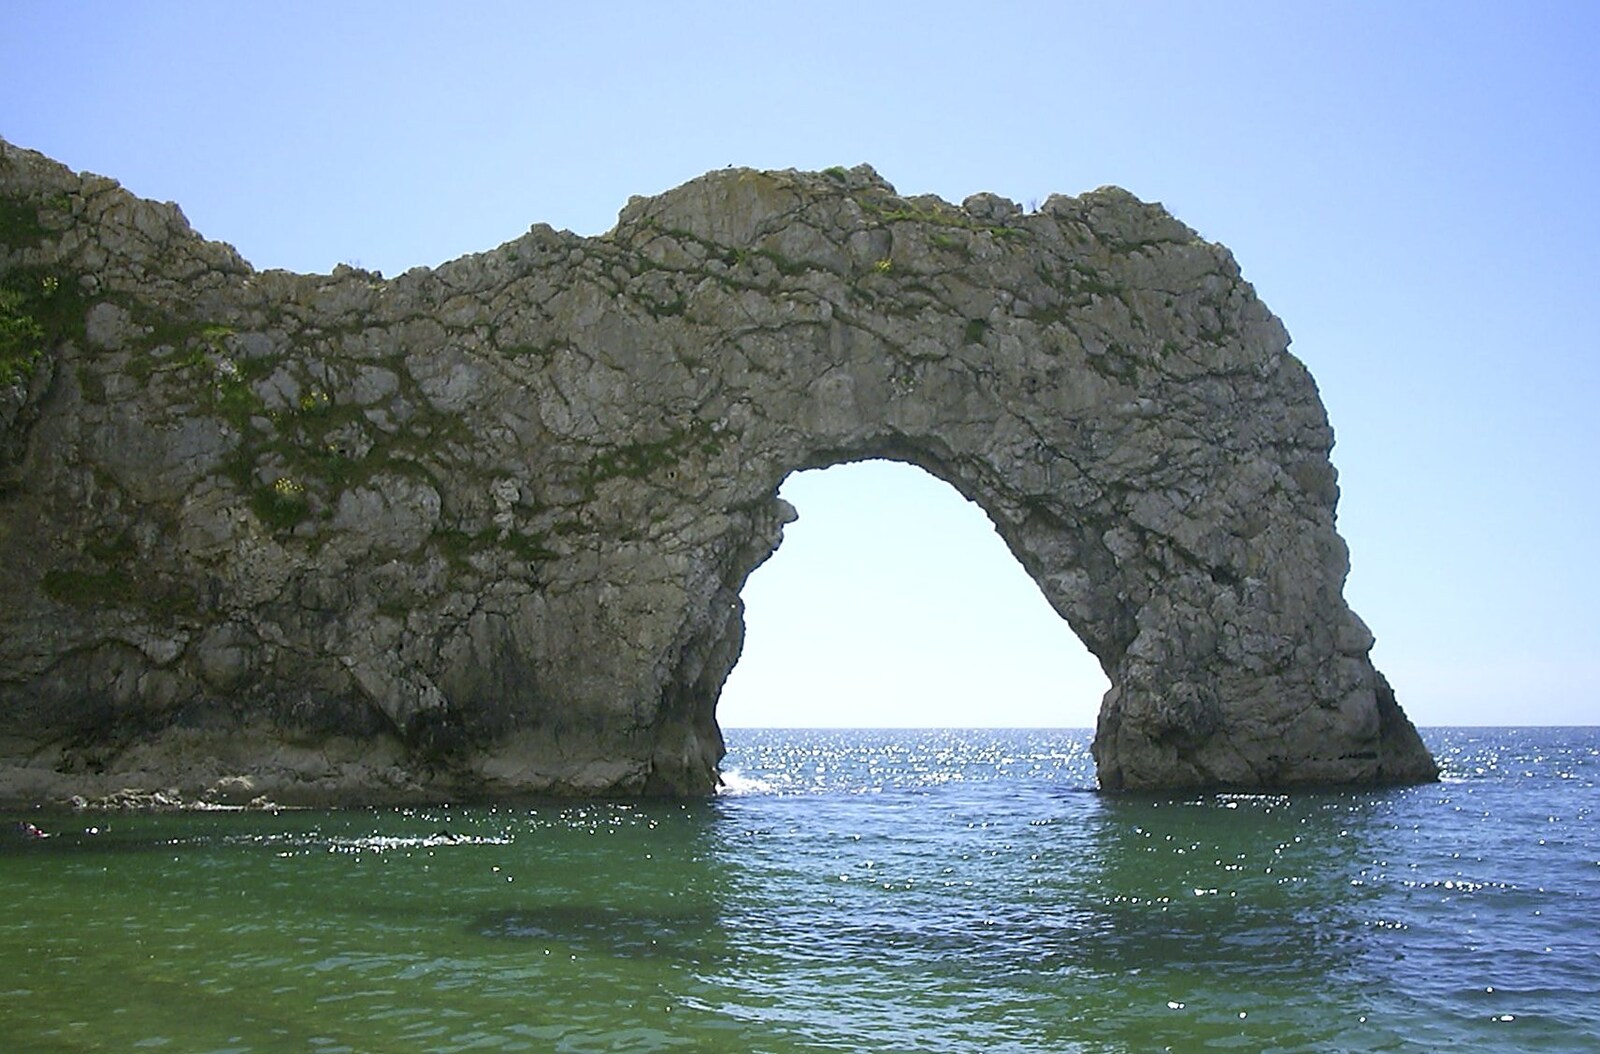 Corfe Castle Camping, Corfe, Dorset - 30th May 2004: Another view of Durdle Door